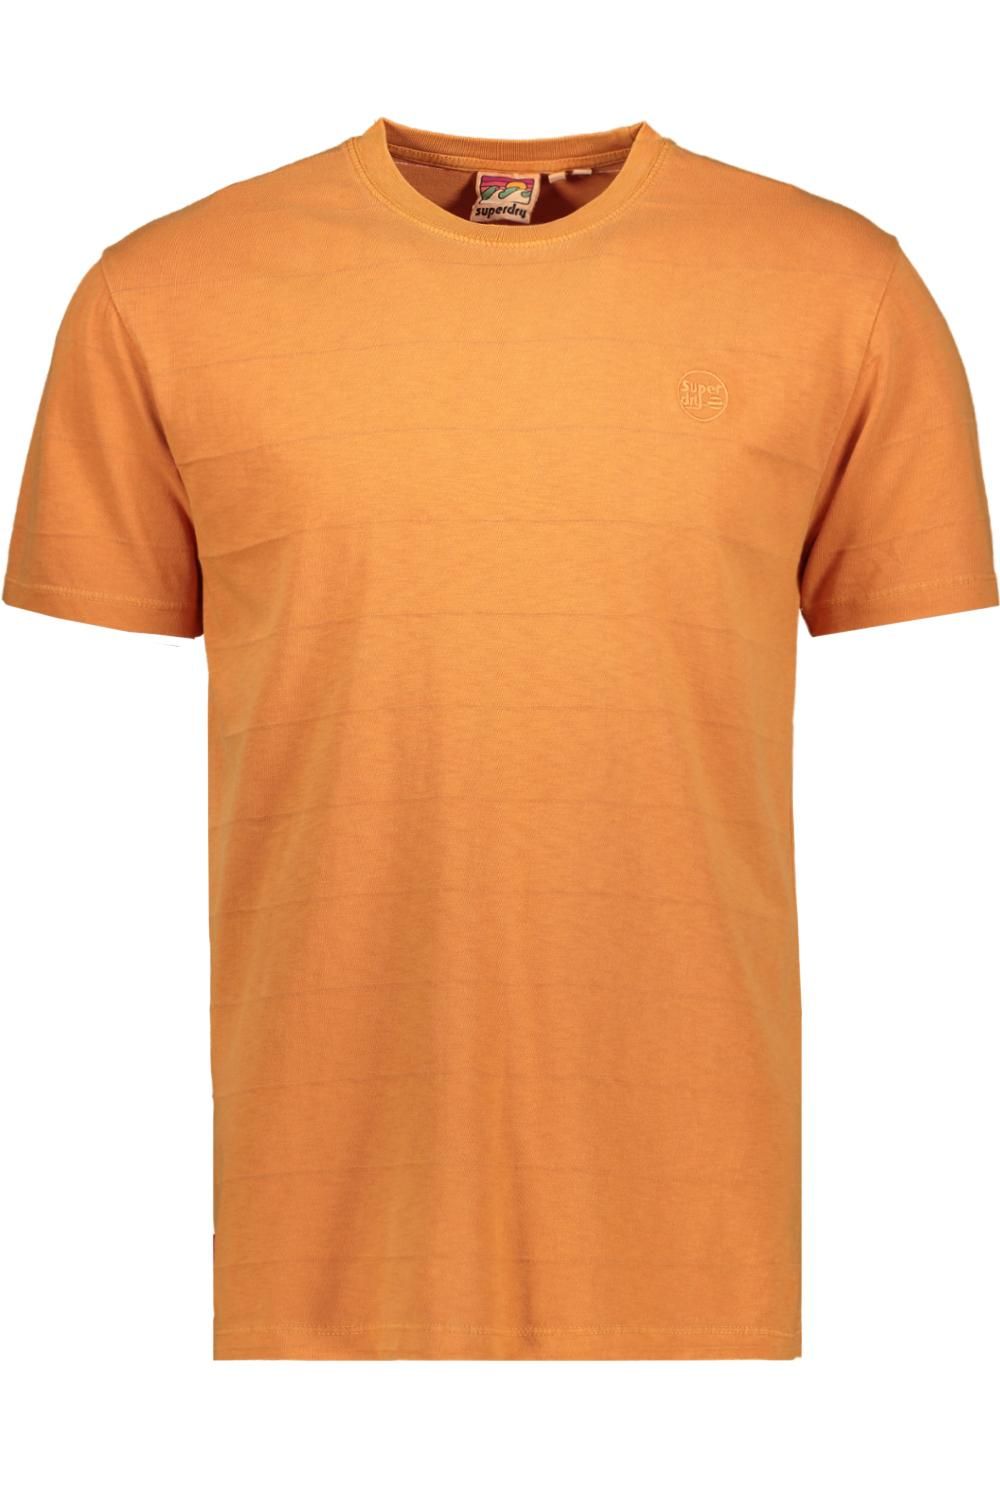 Superdry Vintage texture tee SUNNY 00103827-O6